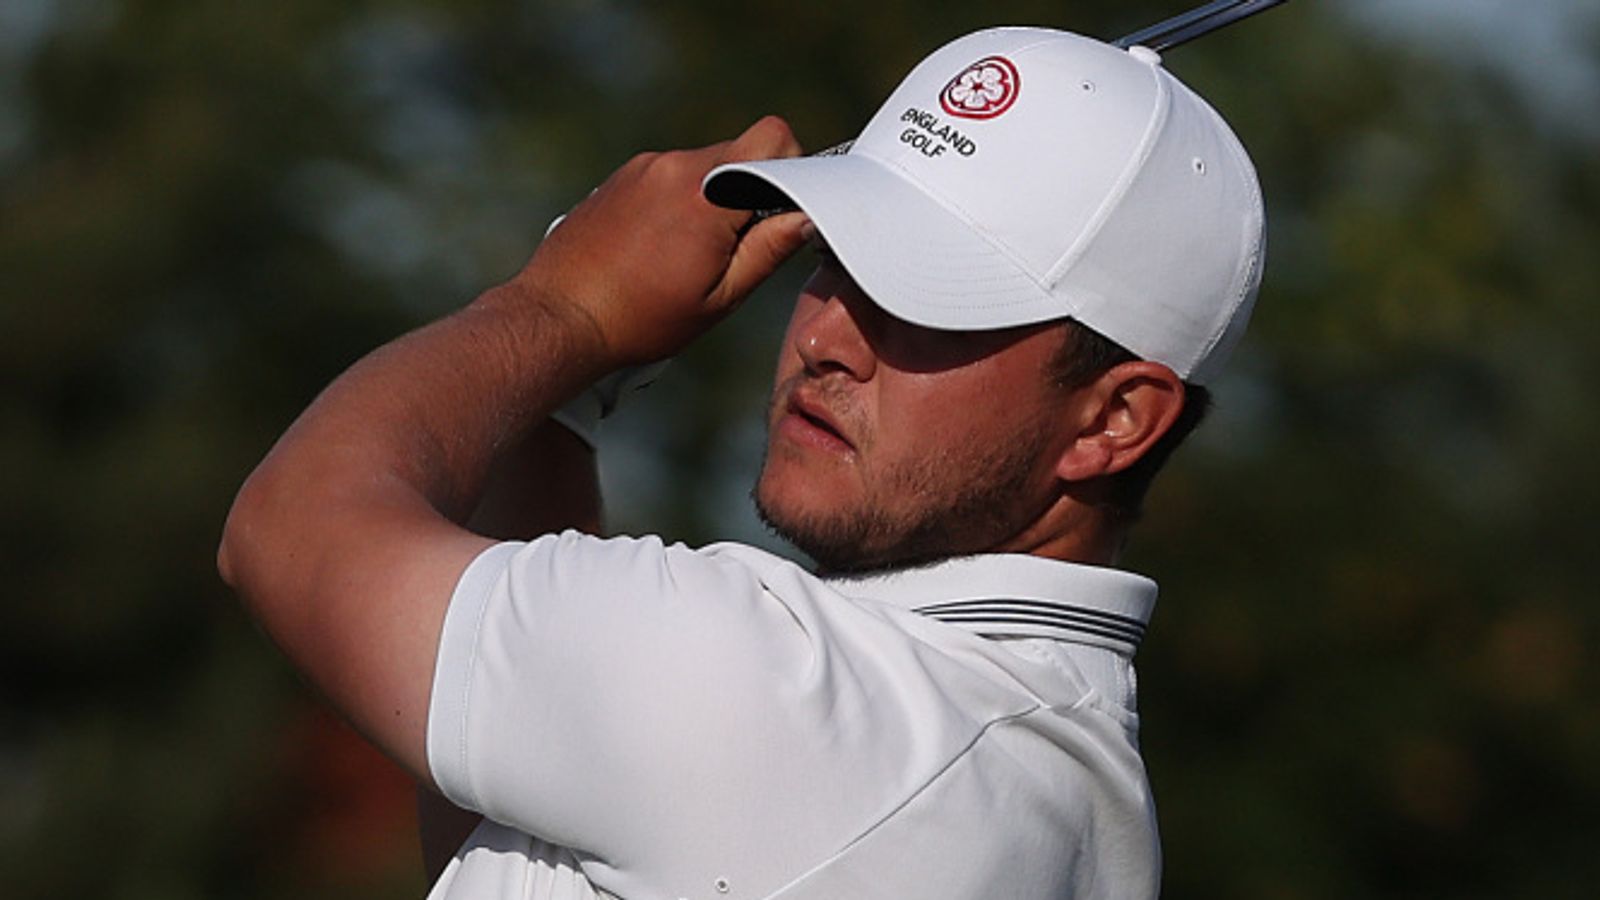 Amateur Championship LIVE: Free YouTube stream from 36-hole final at Royal Lytham & St Annes